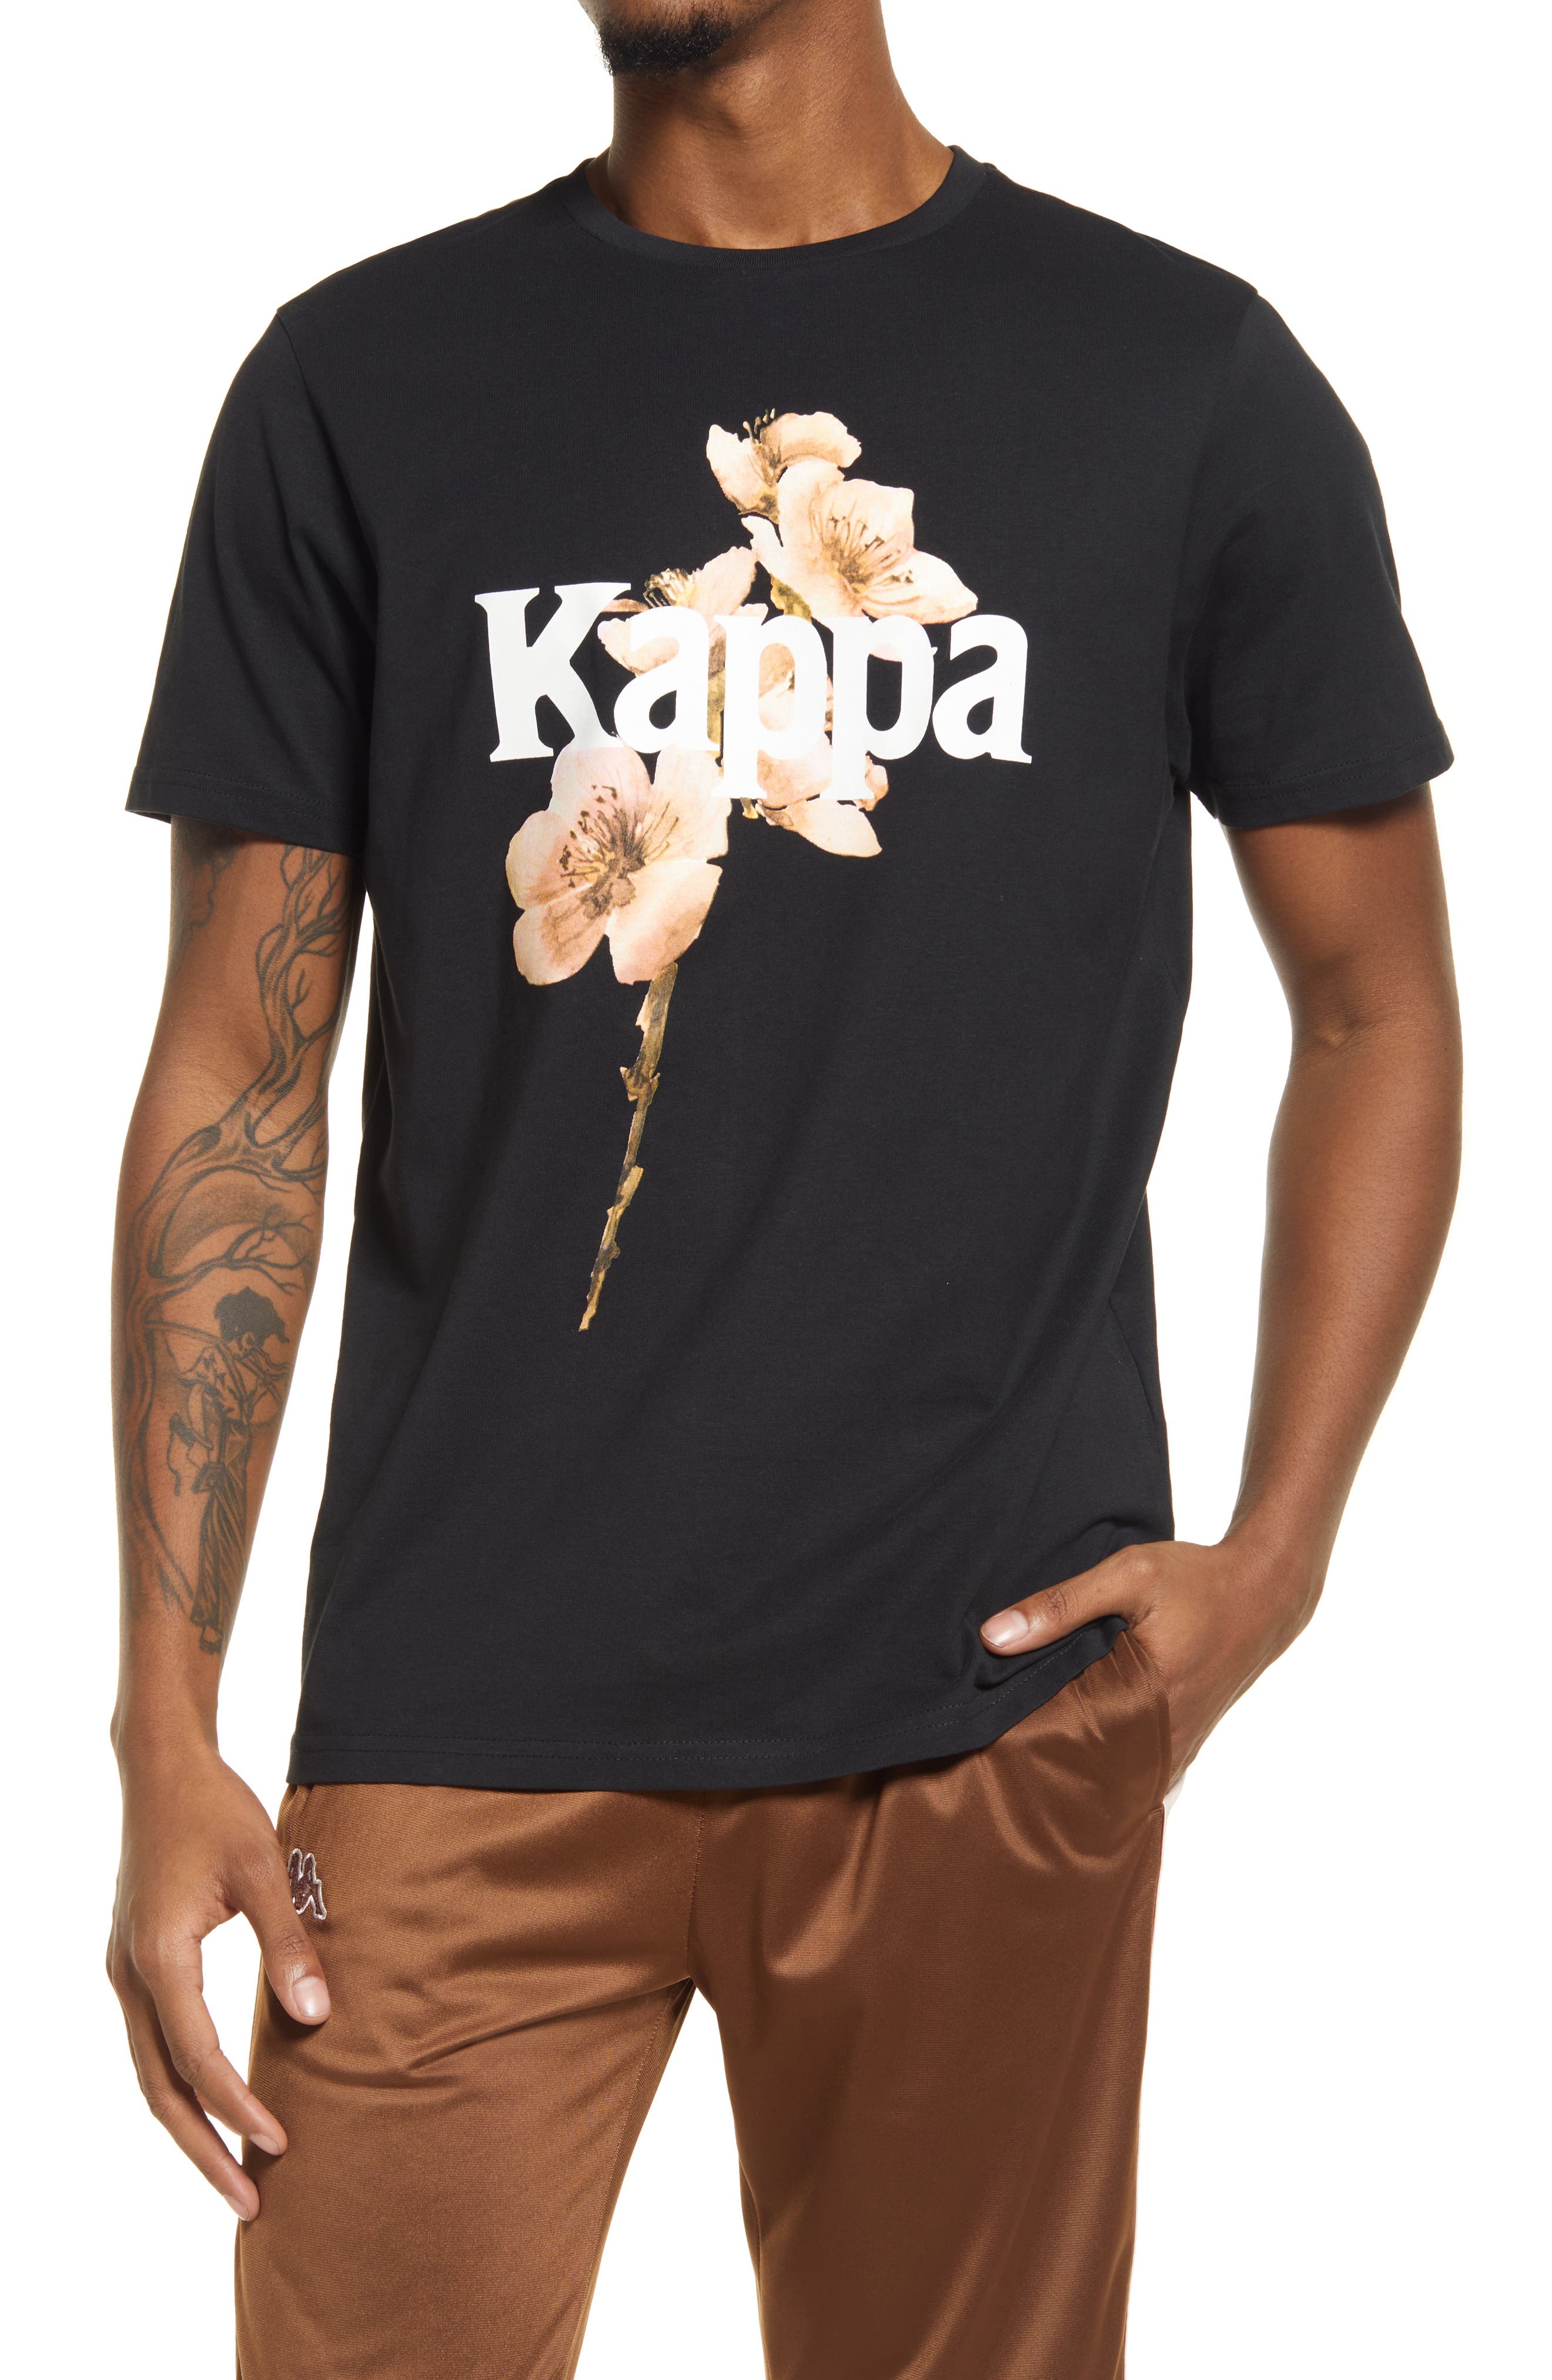 Kappa Vissen Graphic Tee in Black Smoke at Nordstrom, Size Small